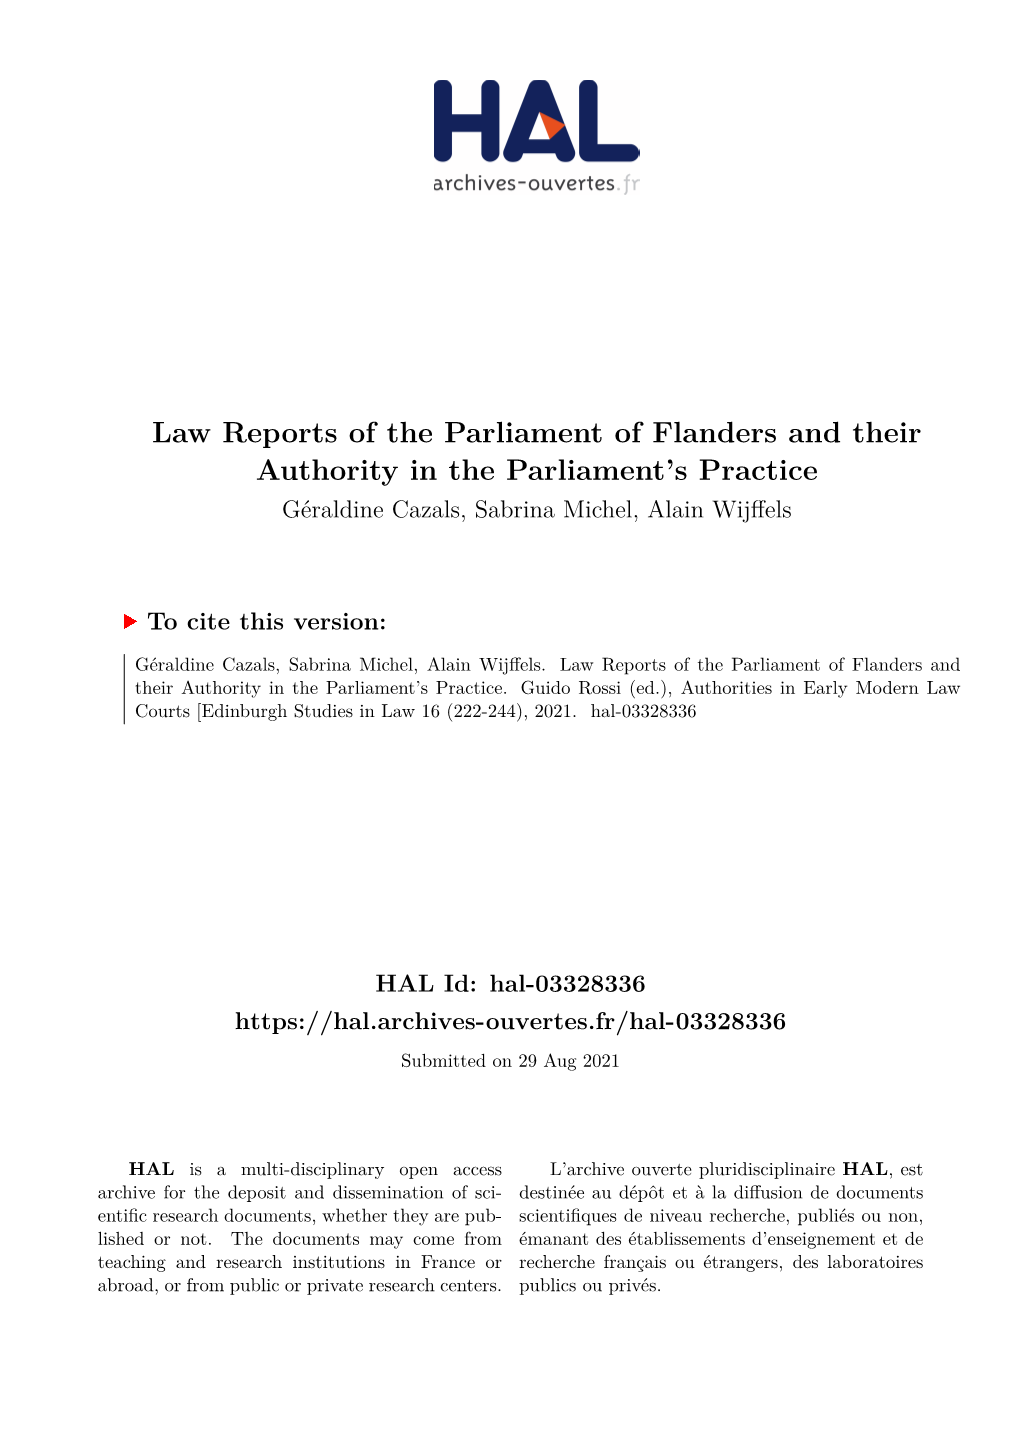 Law Reports of the Parliament of Flanders and Their Authority in the Parliament’S Practice Géraldine Cazals, Sabrina Michel, Alain Wijffels